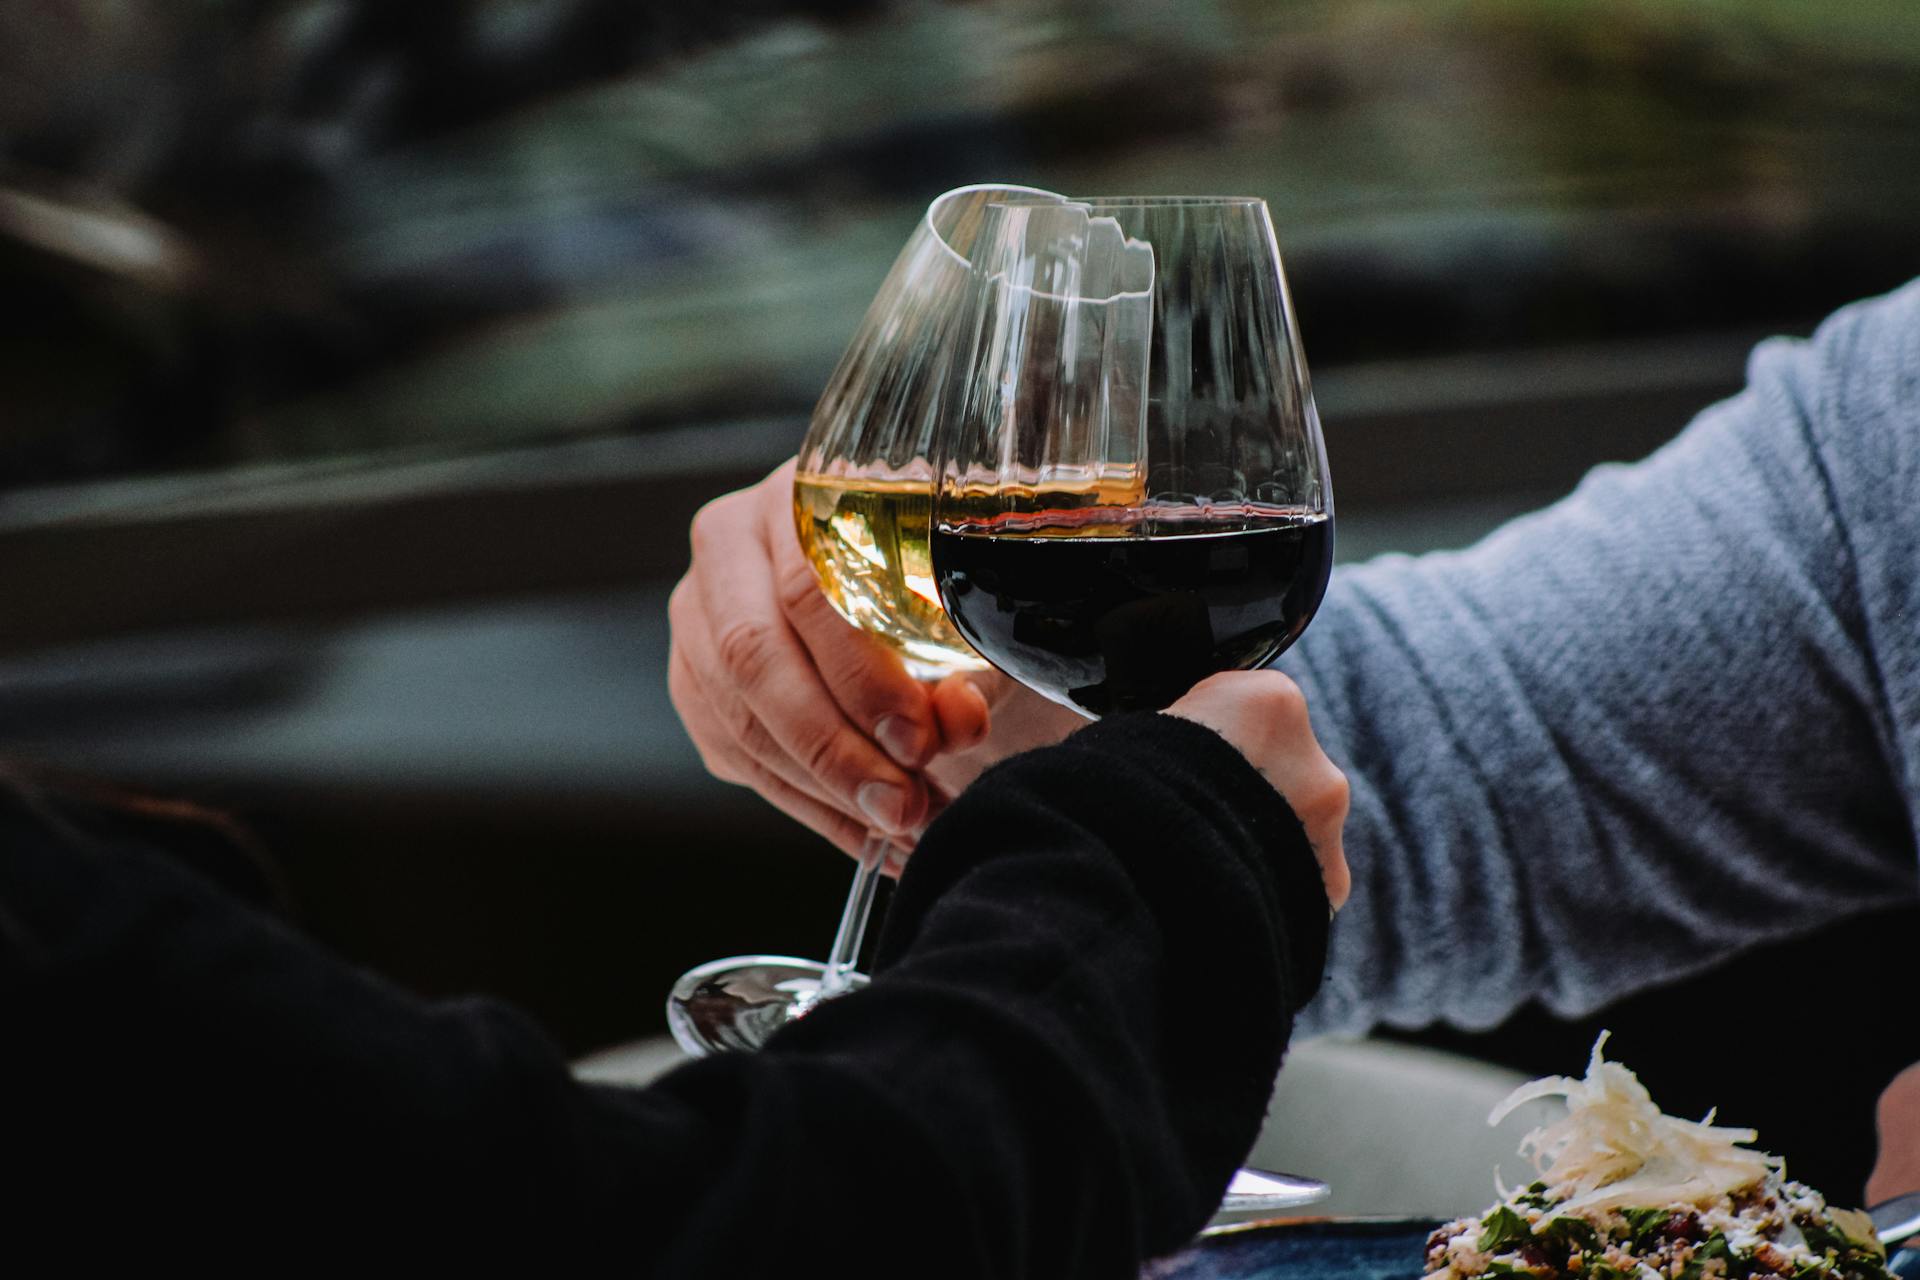 A couple drinking wine | Source: Pexels